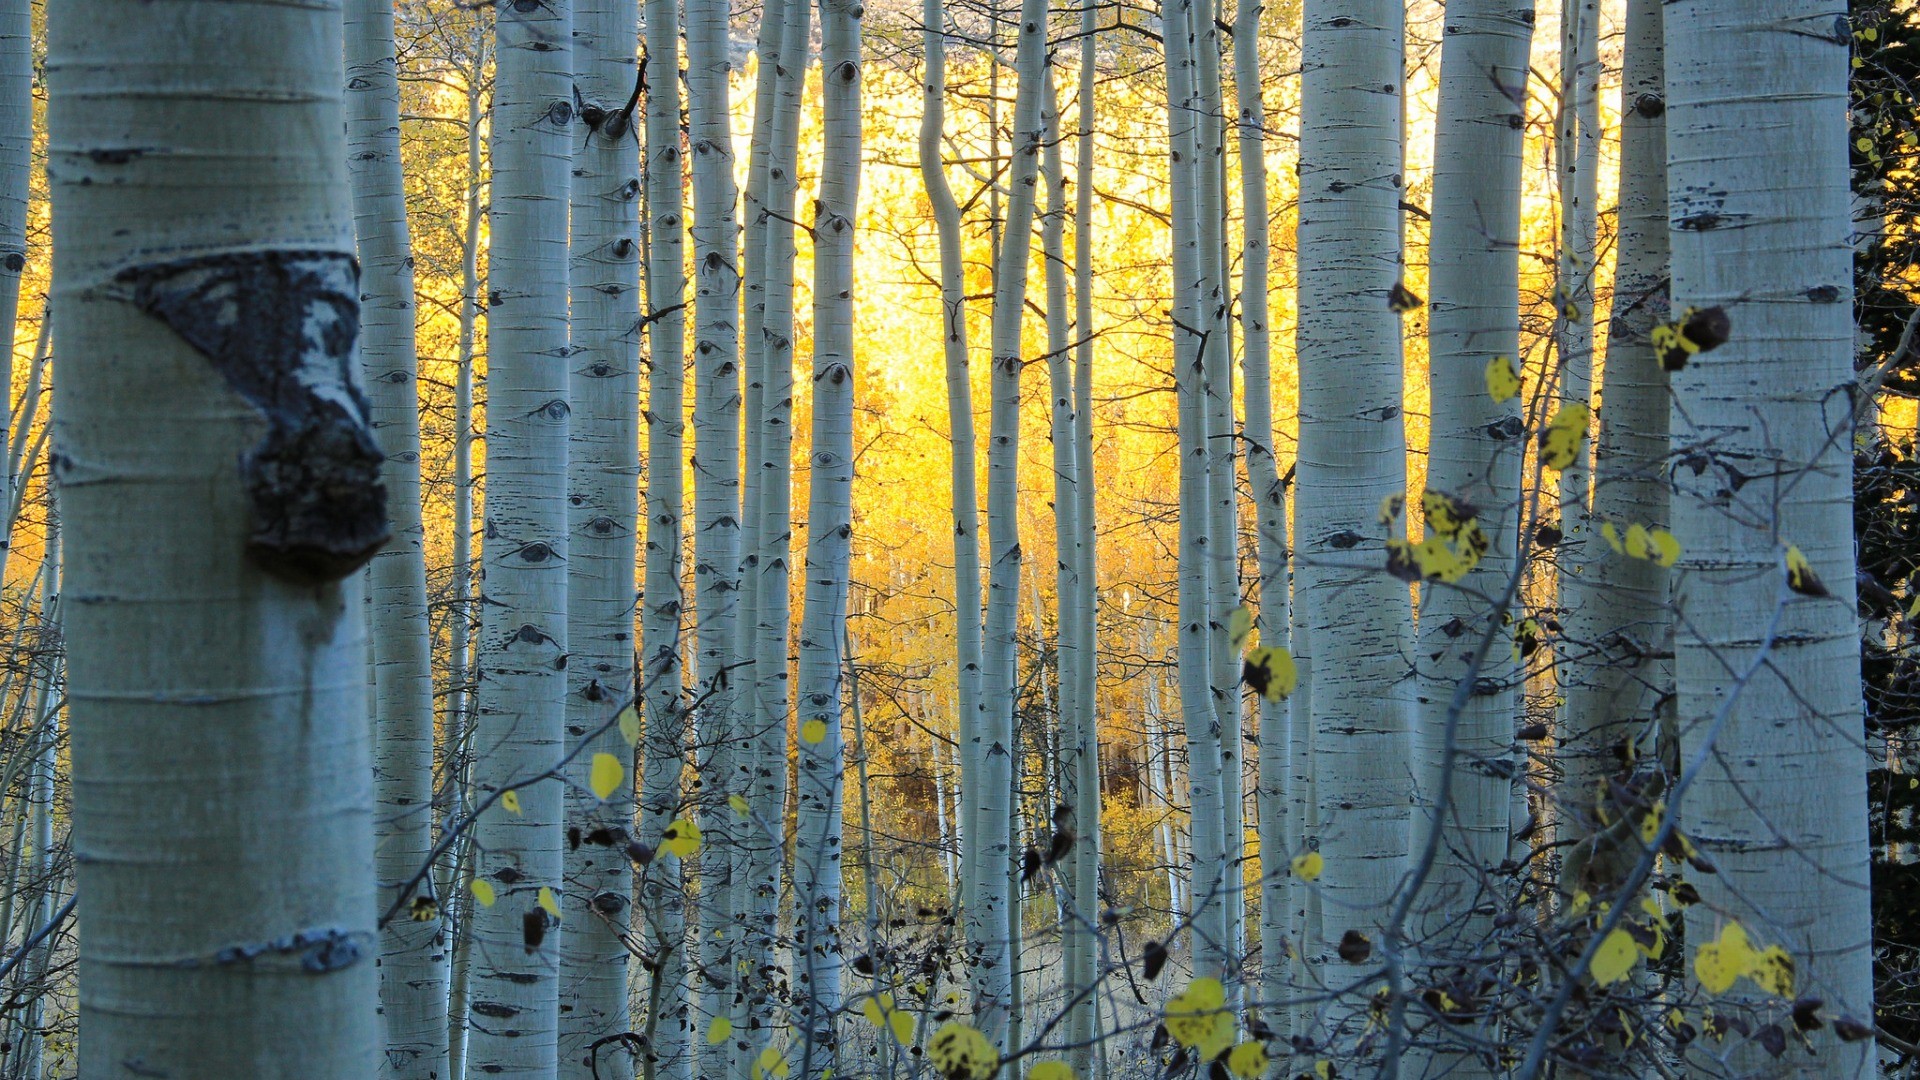 General 1920x1080 nature trees forest Sun sunlight leaves branch Colorado USA birch